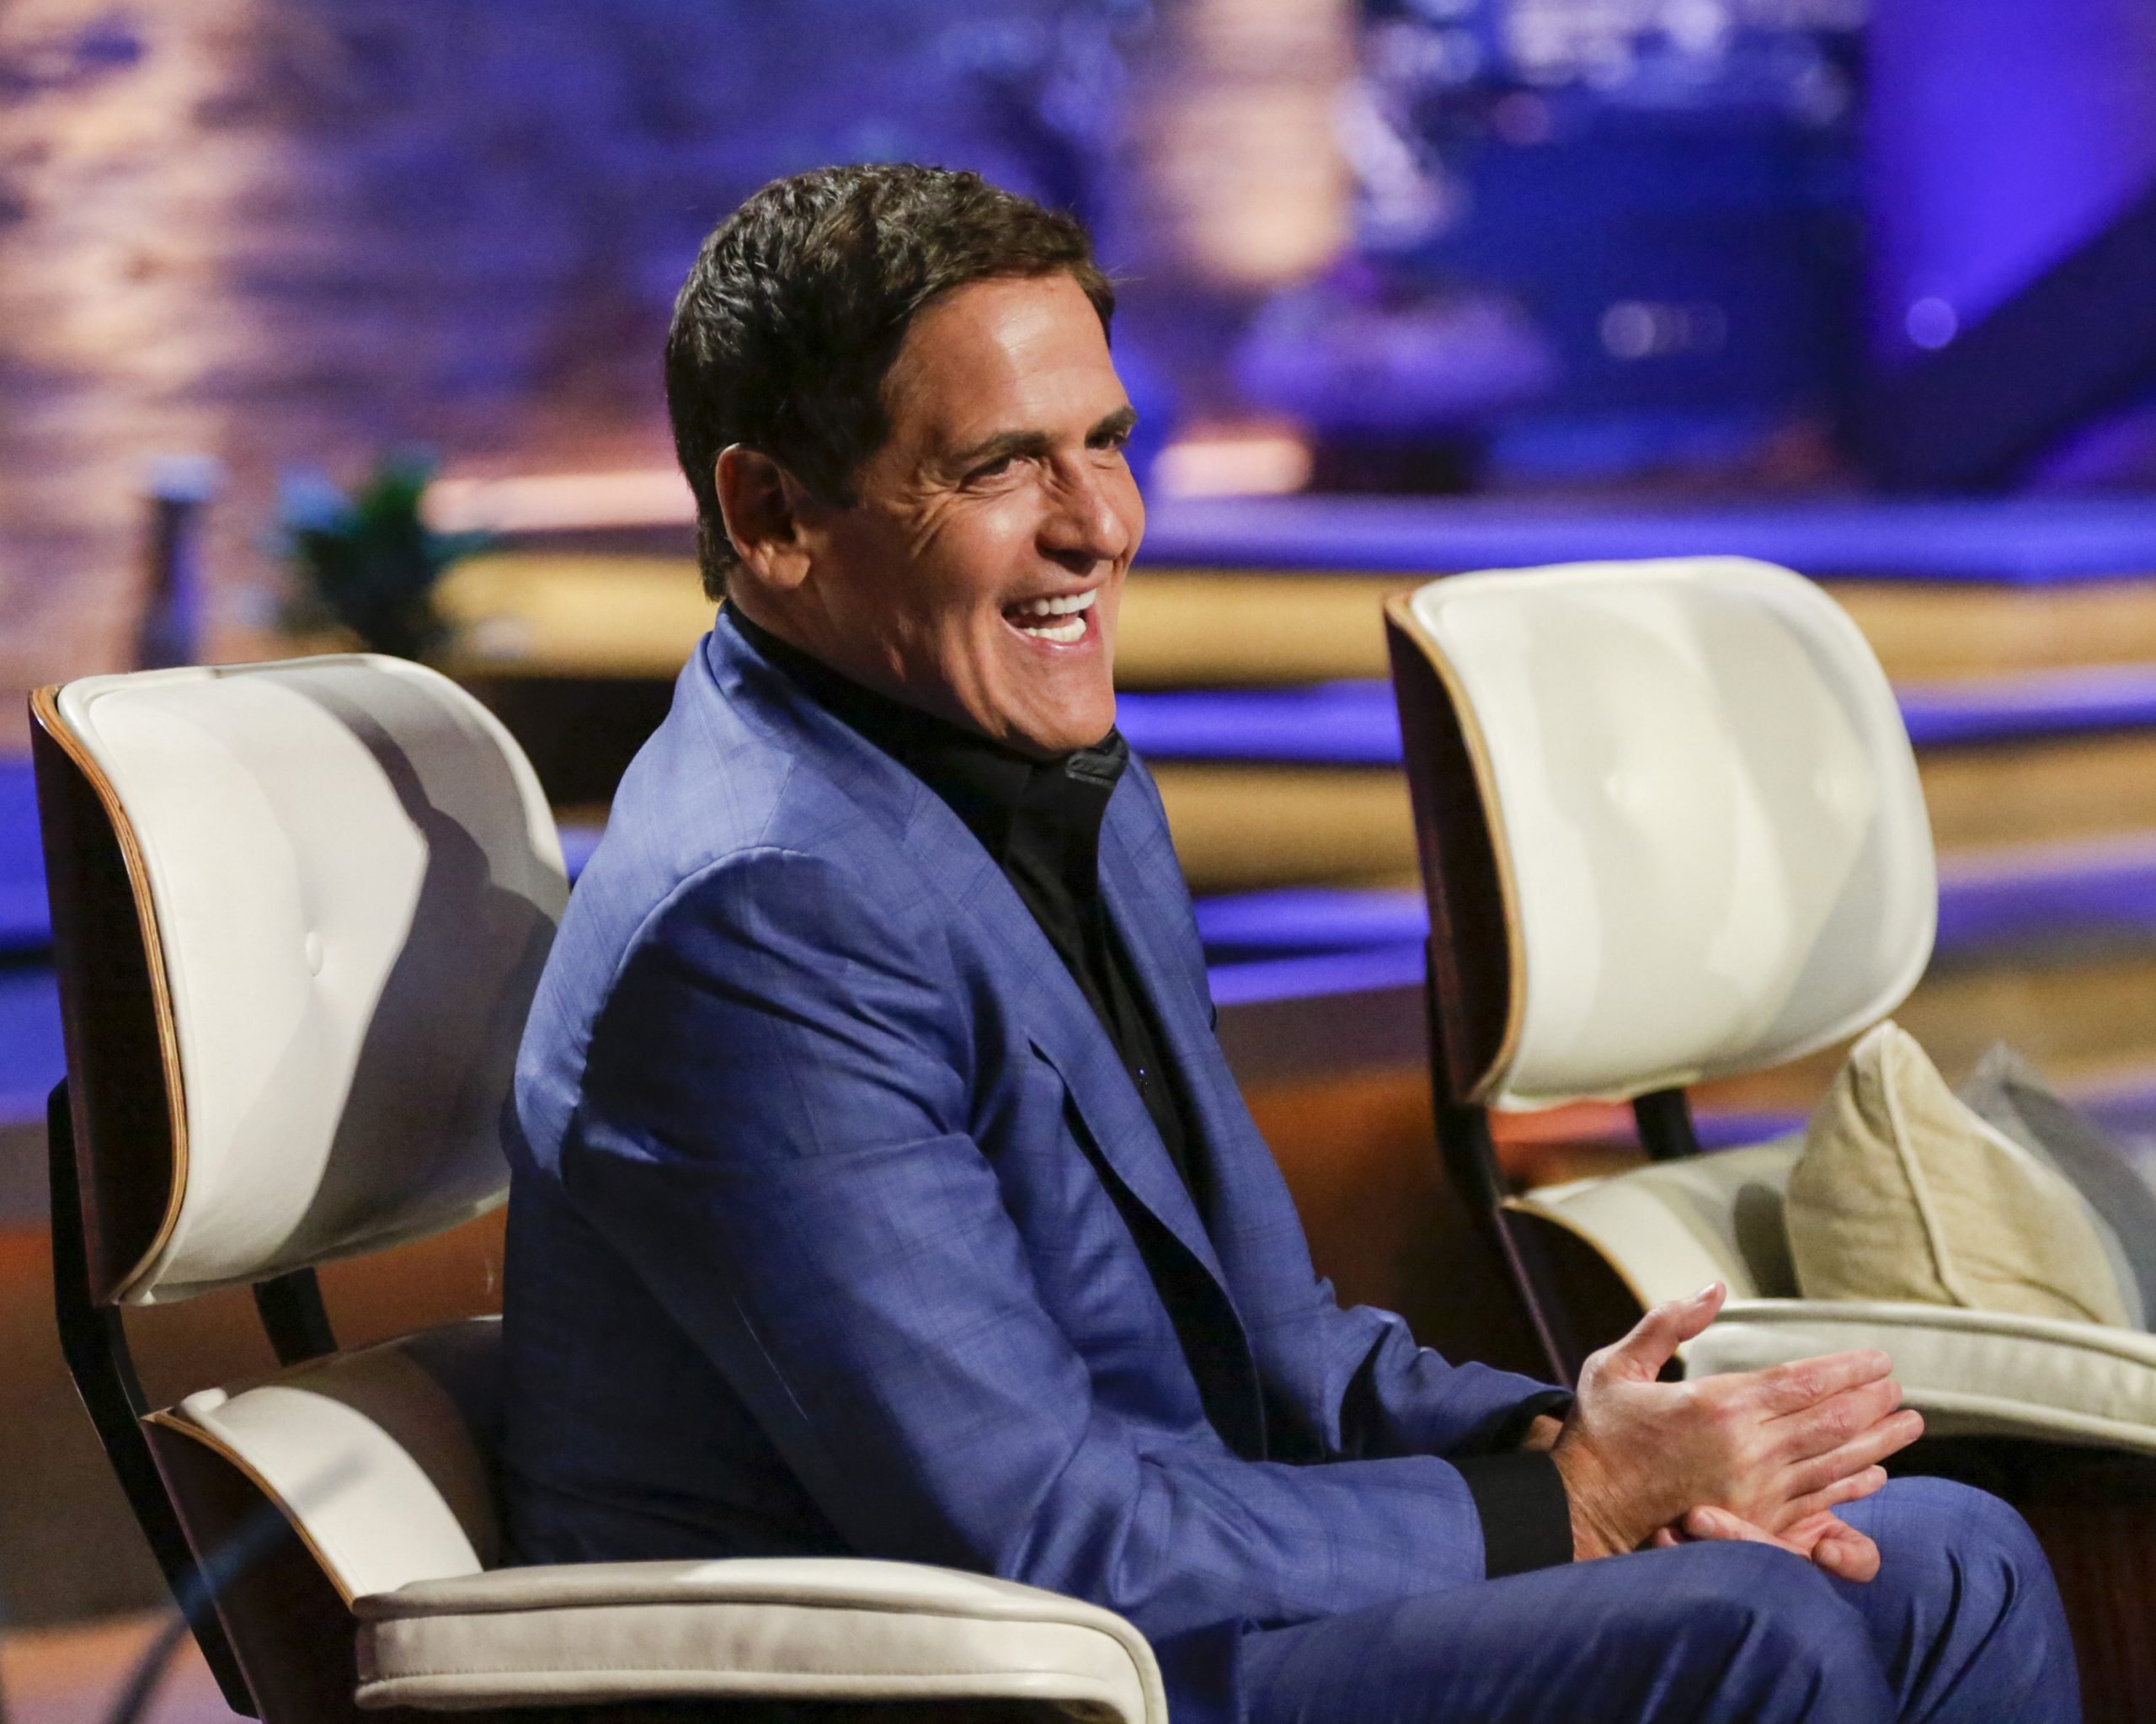 Shark Tank' Star Mark Cuban Threatened To Leave the Show in a Leaked Email